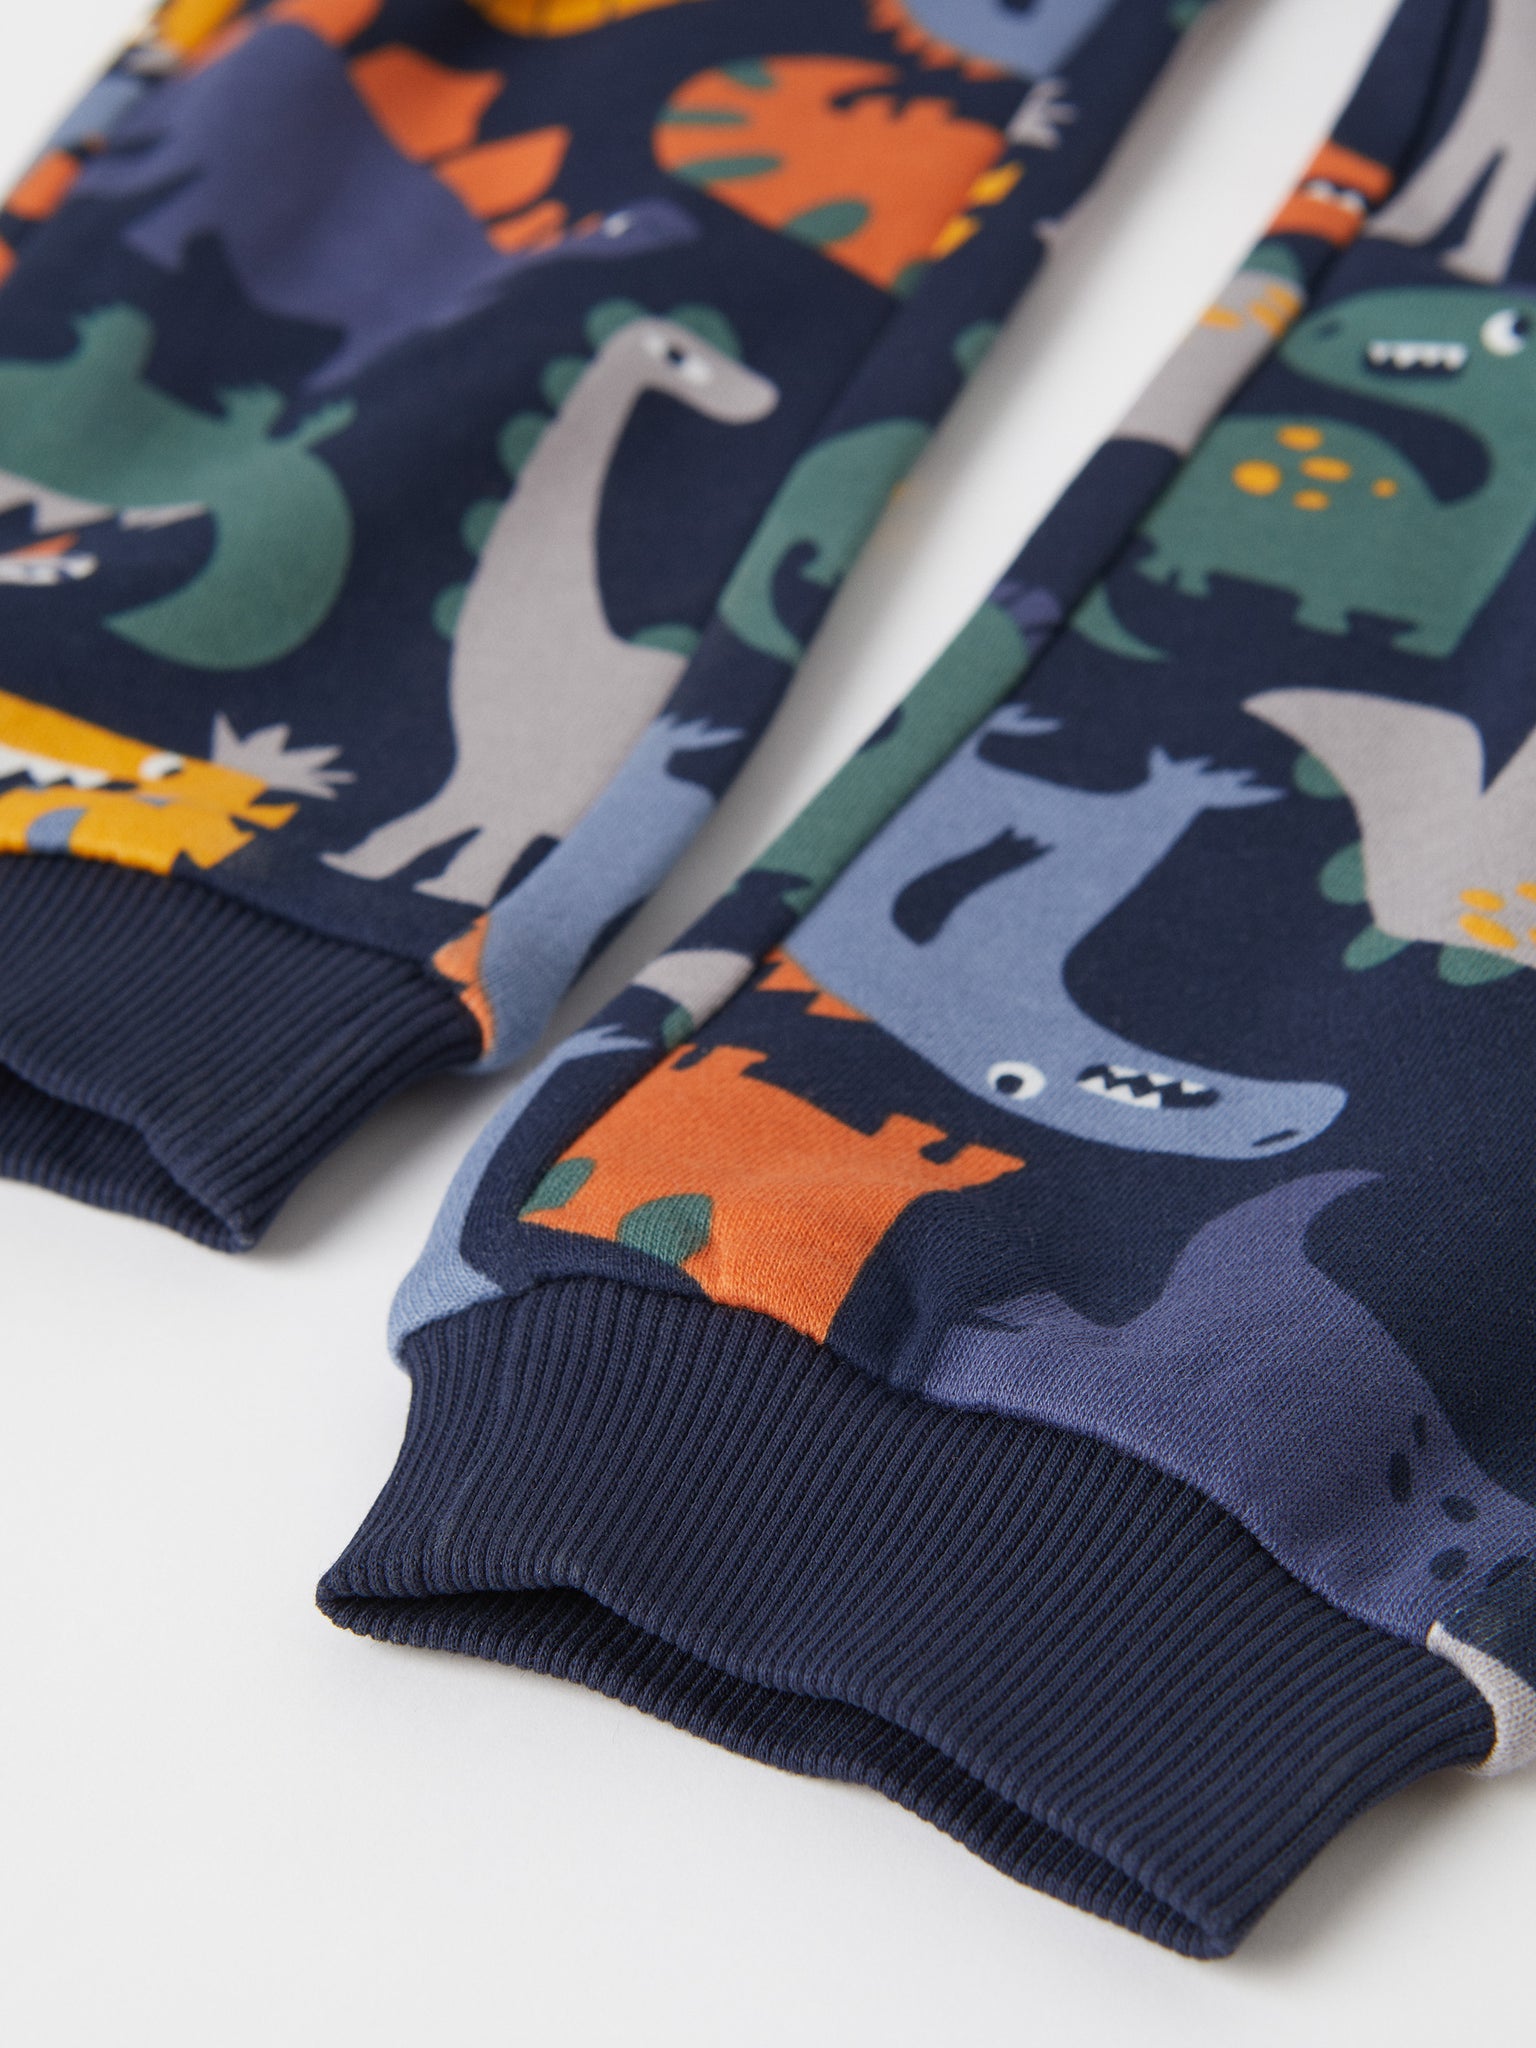 Cotton Dinosaur Print Kids Joggers from the Polarn O. Pyret kidswear collection. Clothes made using sustainably sourced materials.